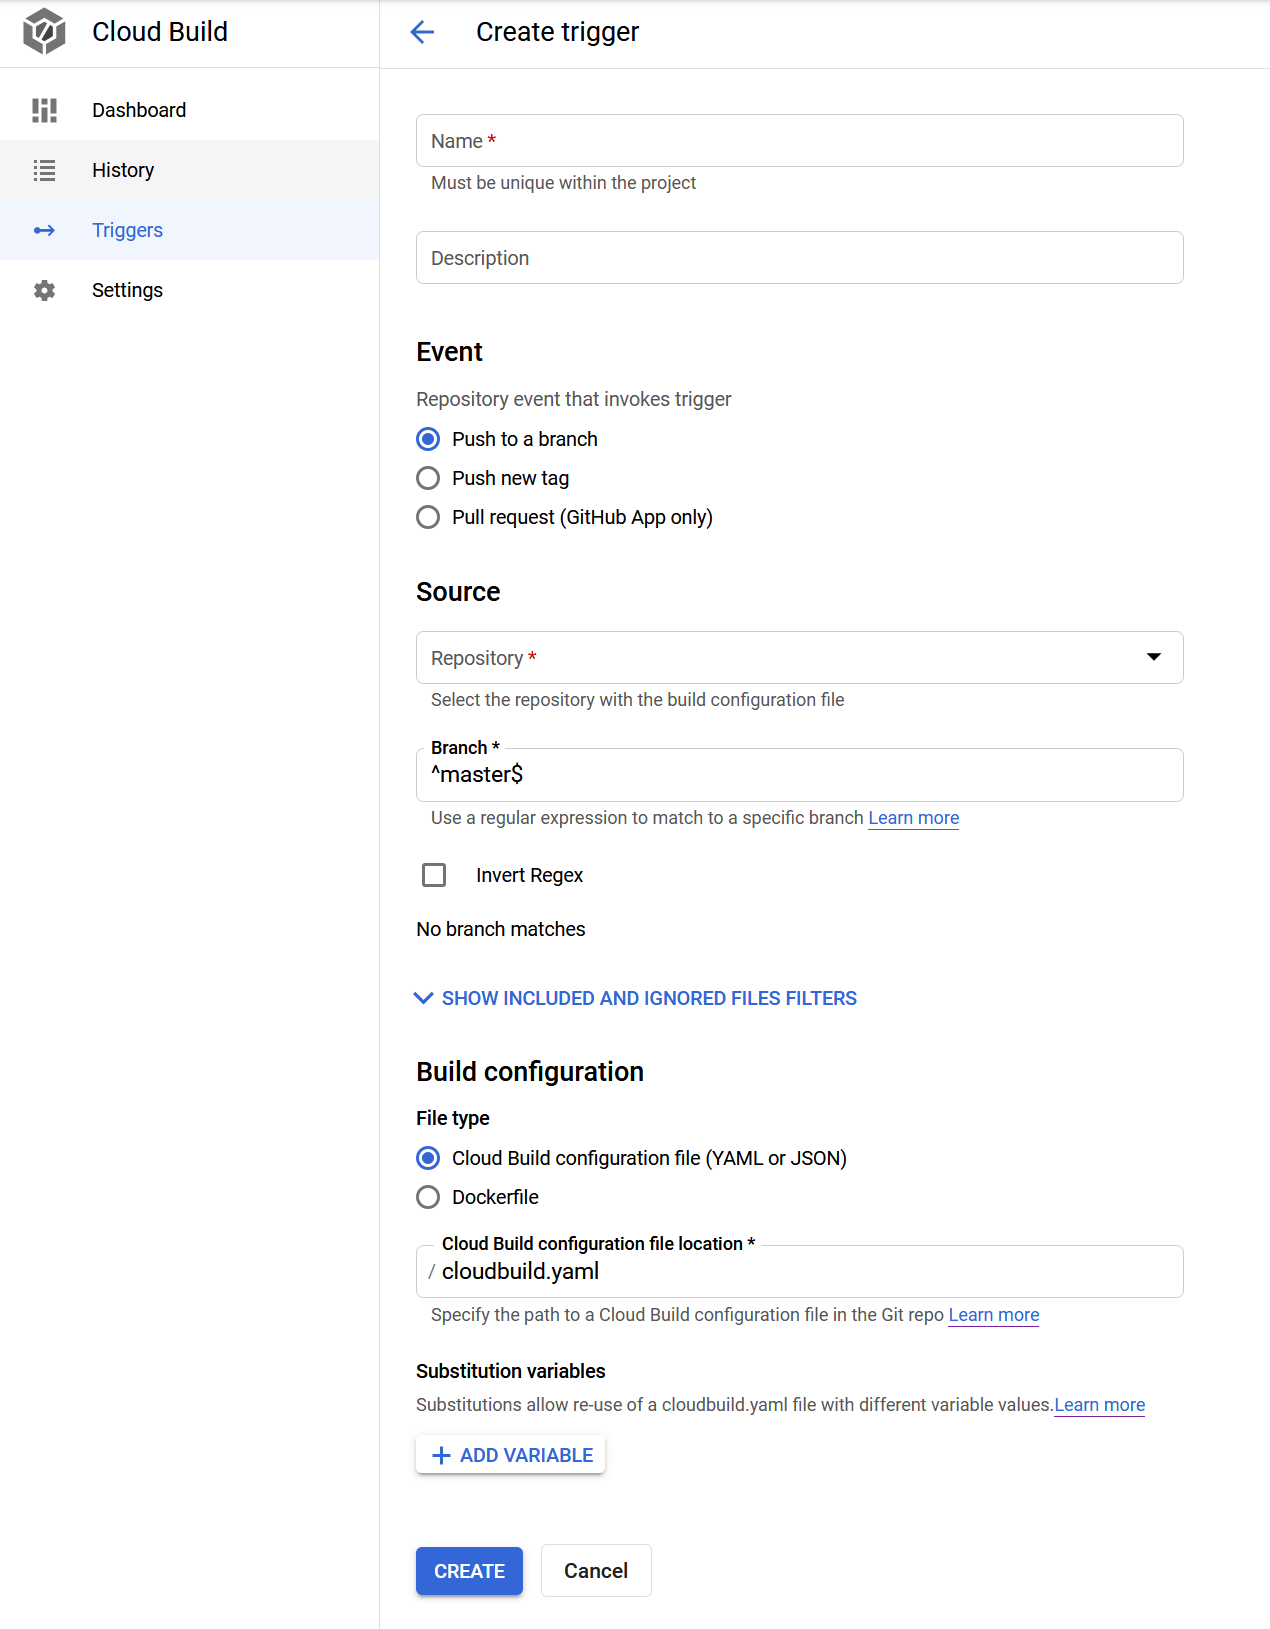 Screenshot of the pick trigger page on Google Cloud